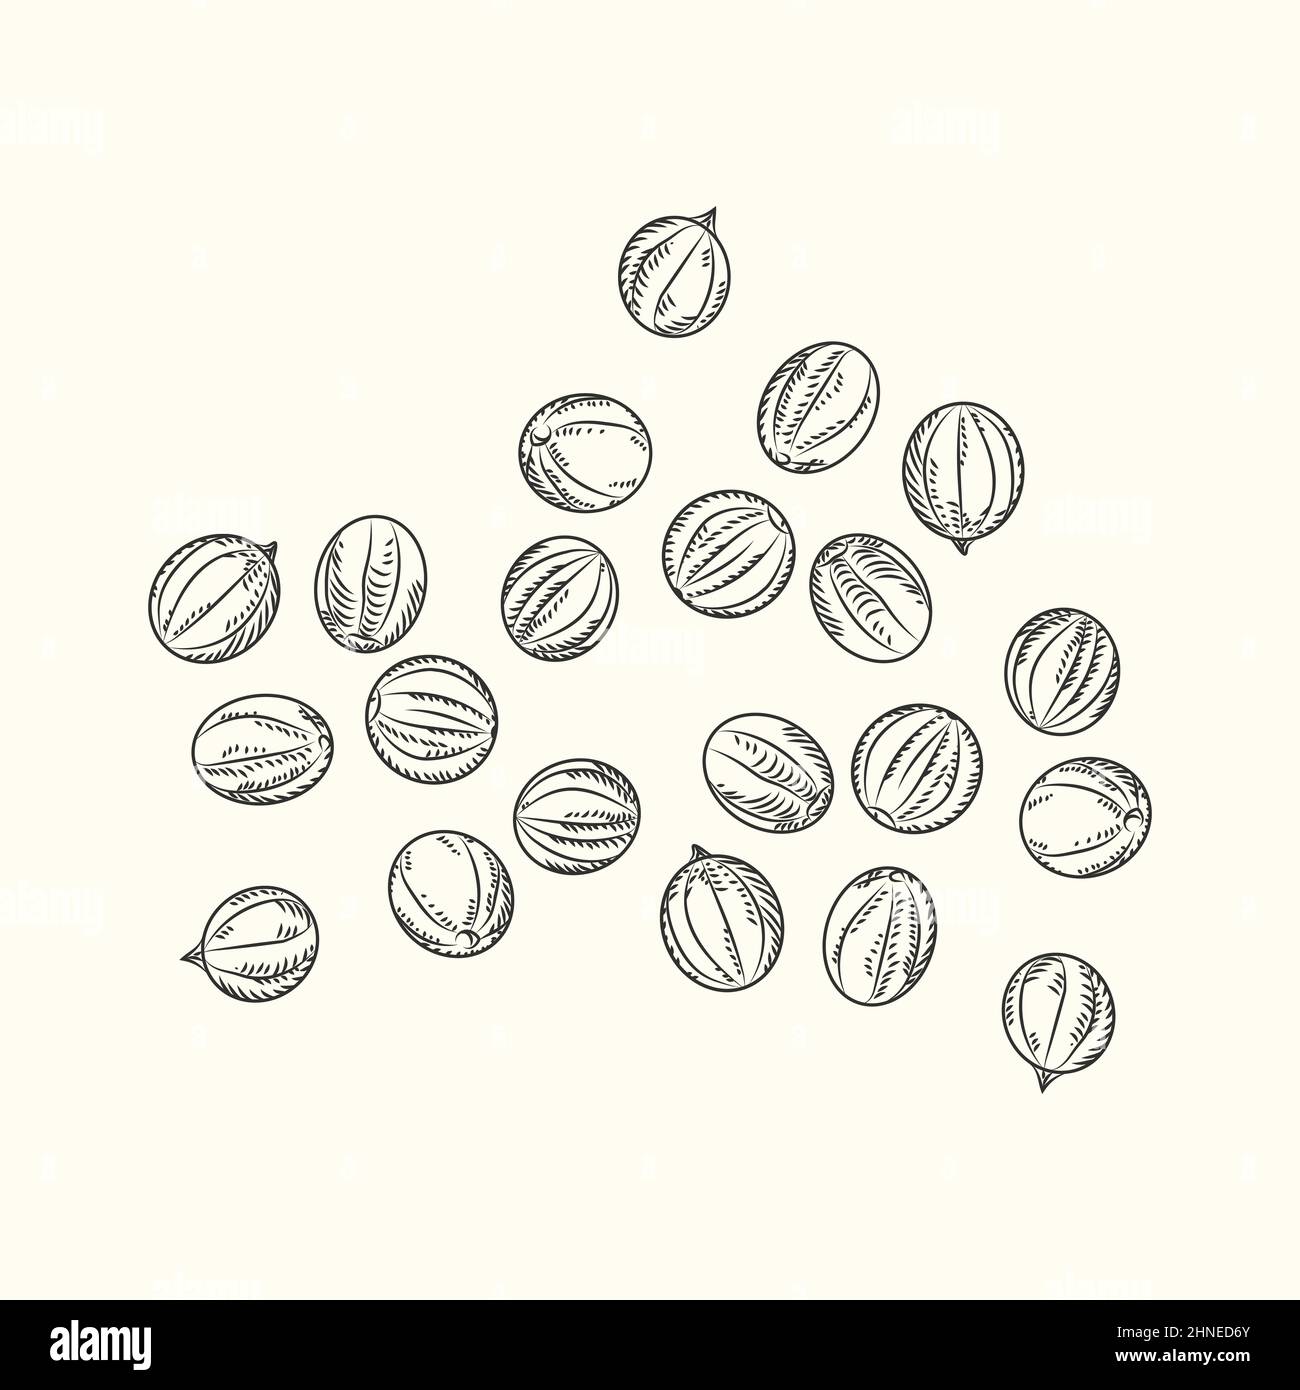 Hand drawn black pepper isolated on white background. Sketch handful of black peppercorn. Engraving vintage style. Vector illustration. Stock Vector